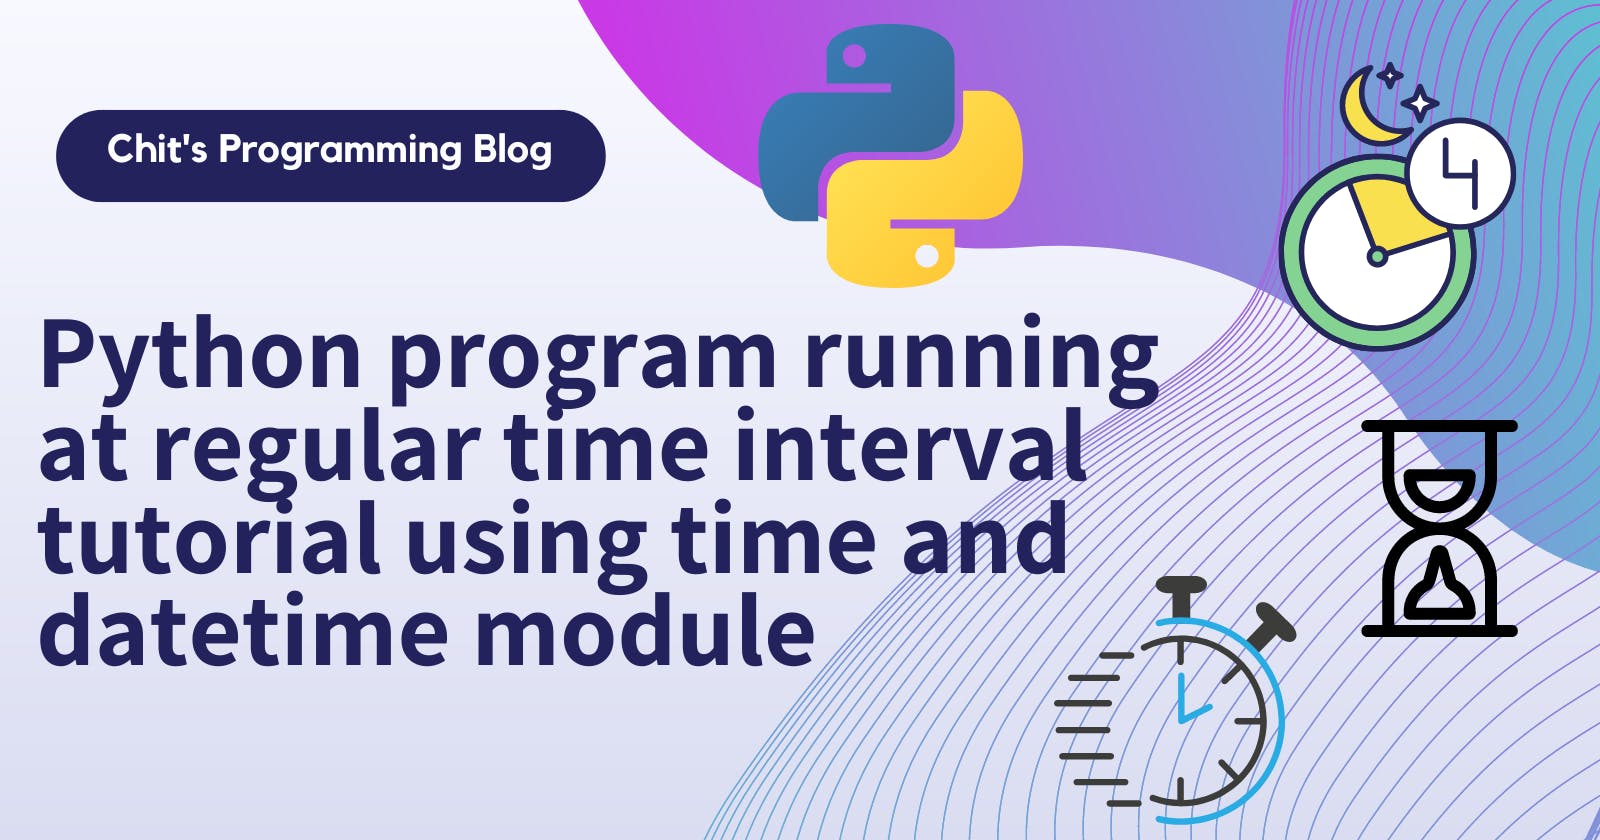 Python program running at regular time interval tutorial using time and datetime module